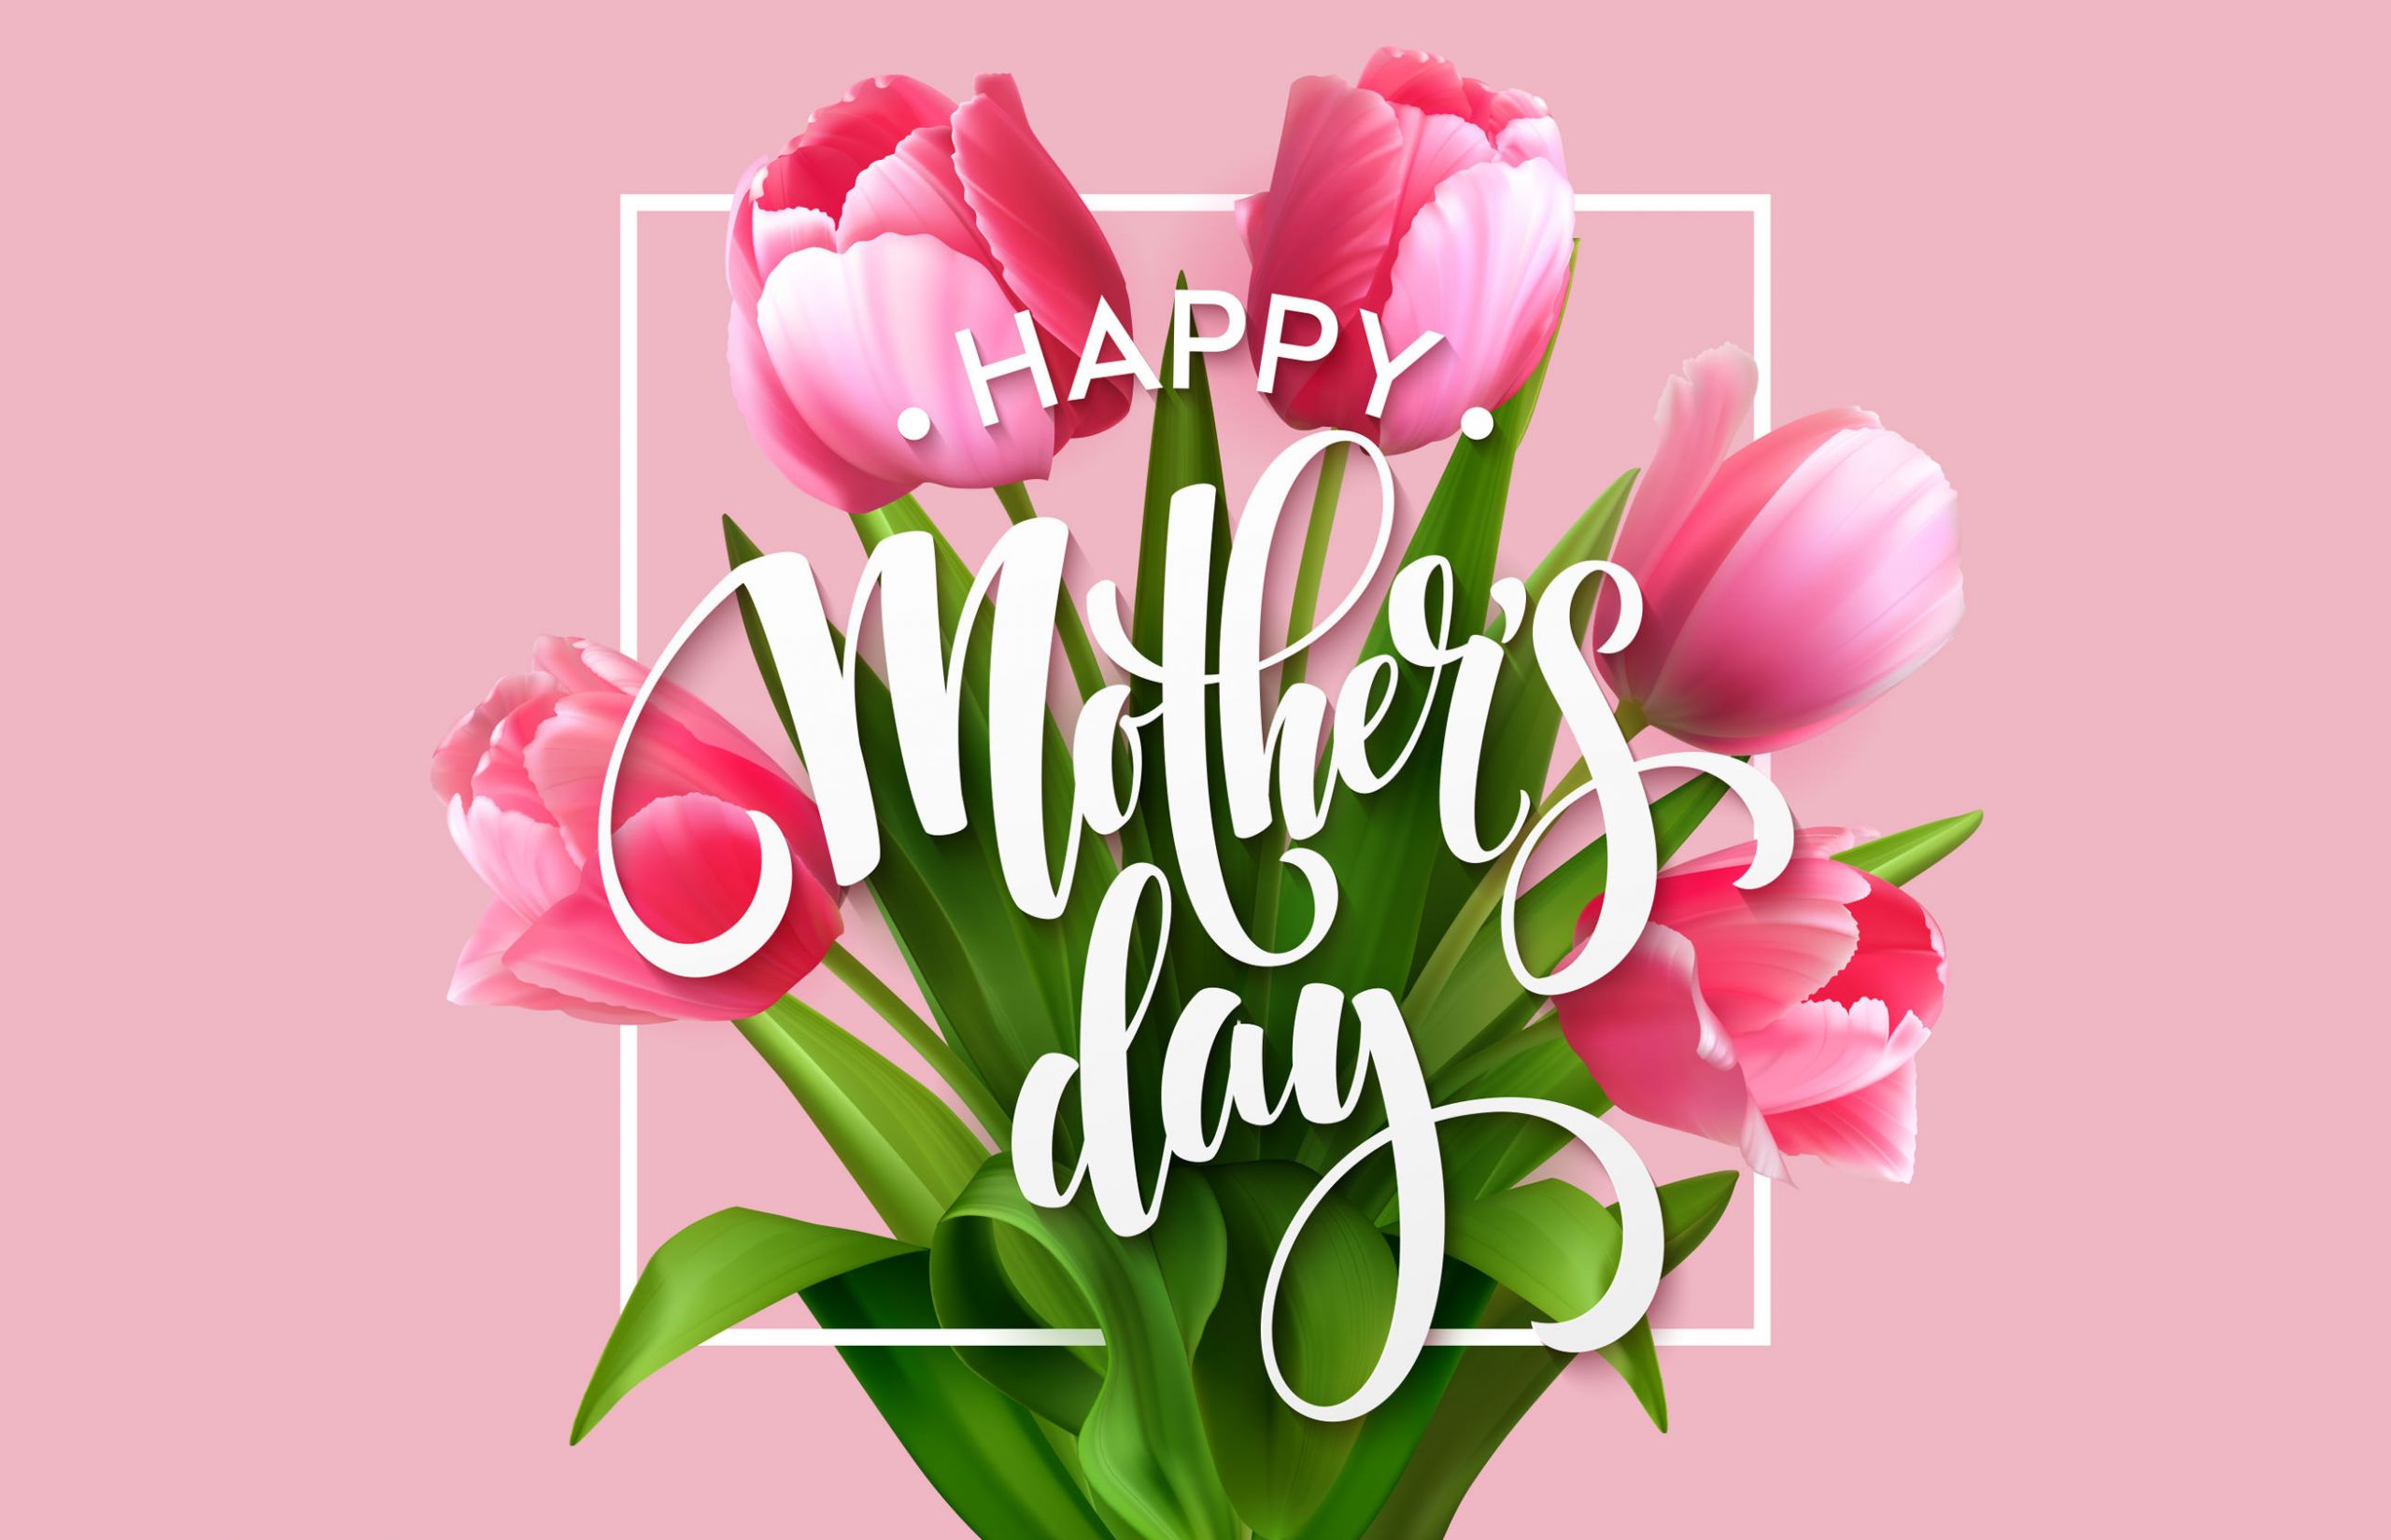 Happy Mothers Day Inspirational Quotes
 60 Inspirational Dear Mom And Happy Mother s Day Quotes